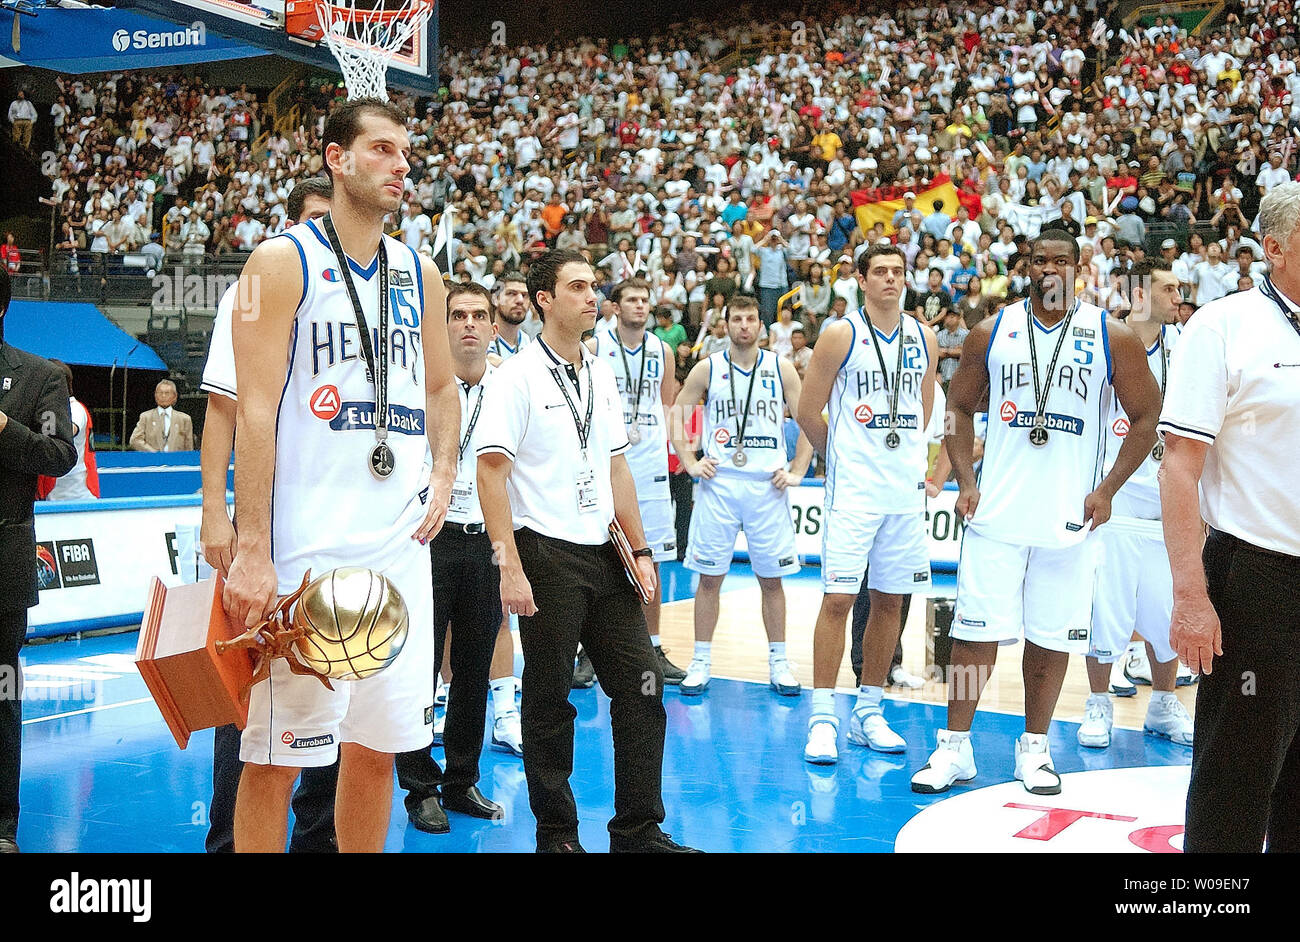 Players of Geece stand motionless with a glum look after the awarding ceremony during the FIBA World Basketball Championship, in Saitama, Japan on September 3, 2006. (UPI Photo/Keizo Mori) Stock Photo